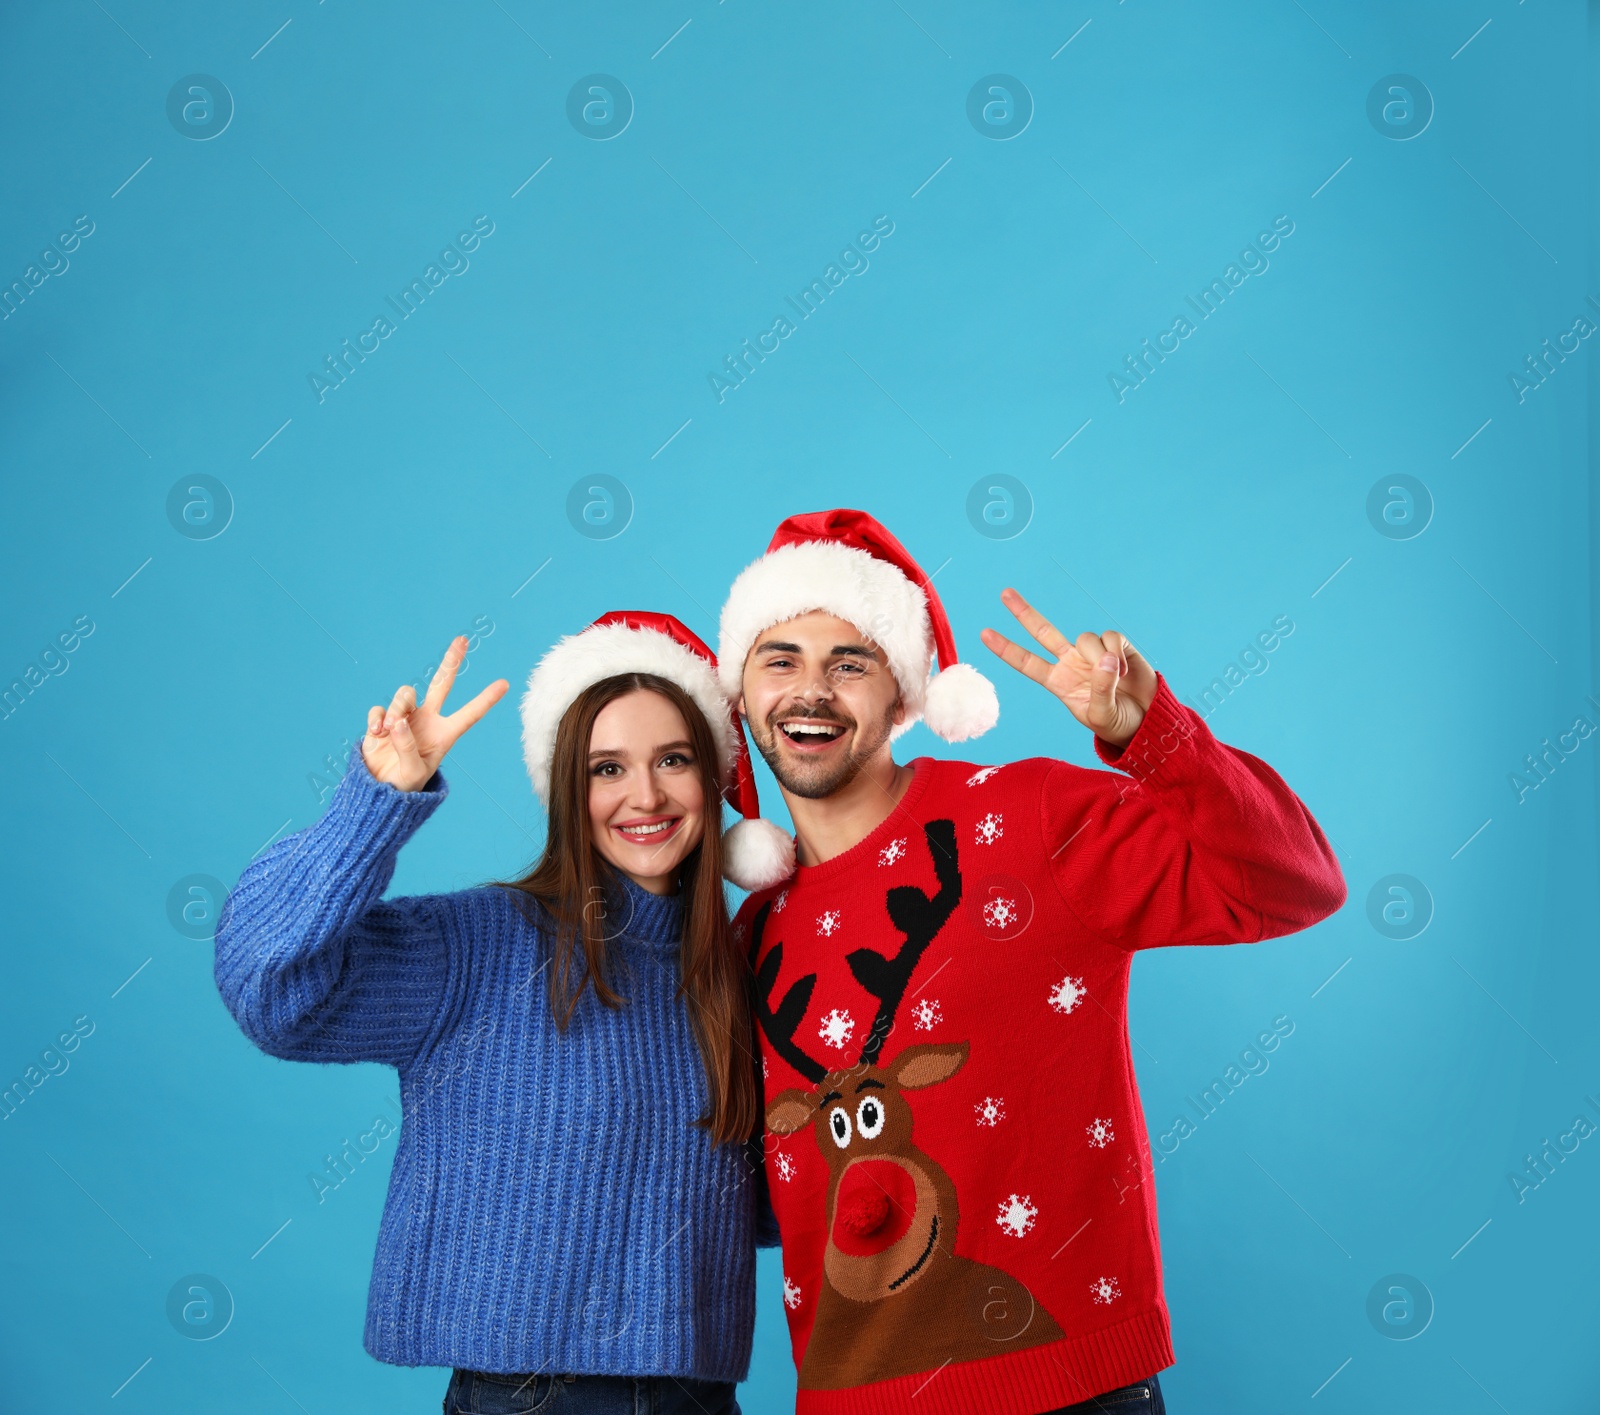 Photo of Couple wearing Christmas sweaters and Santa hats on blue background